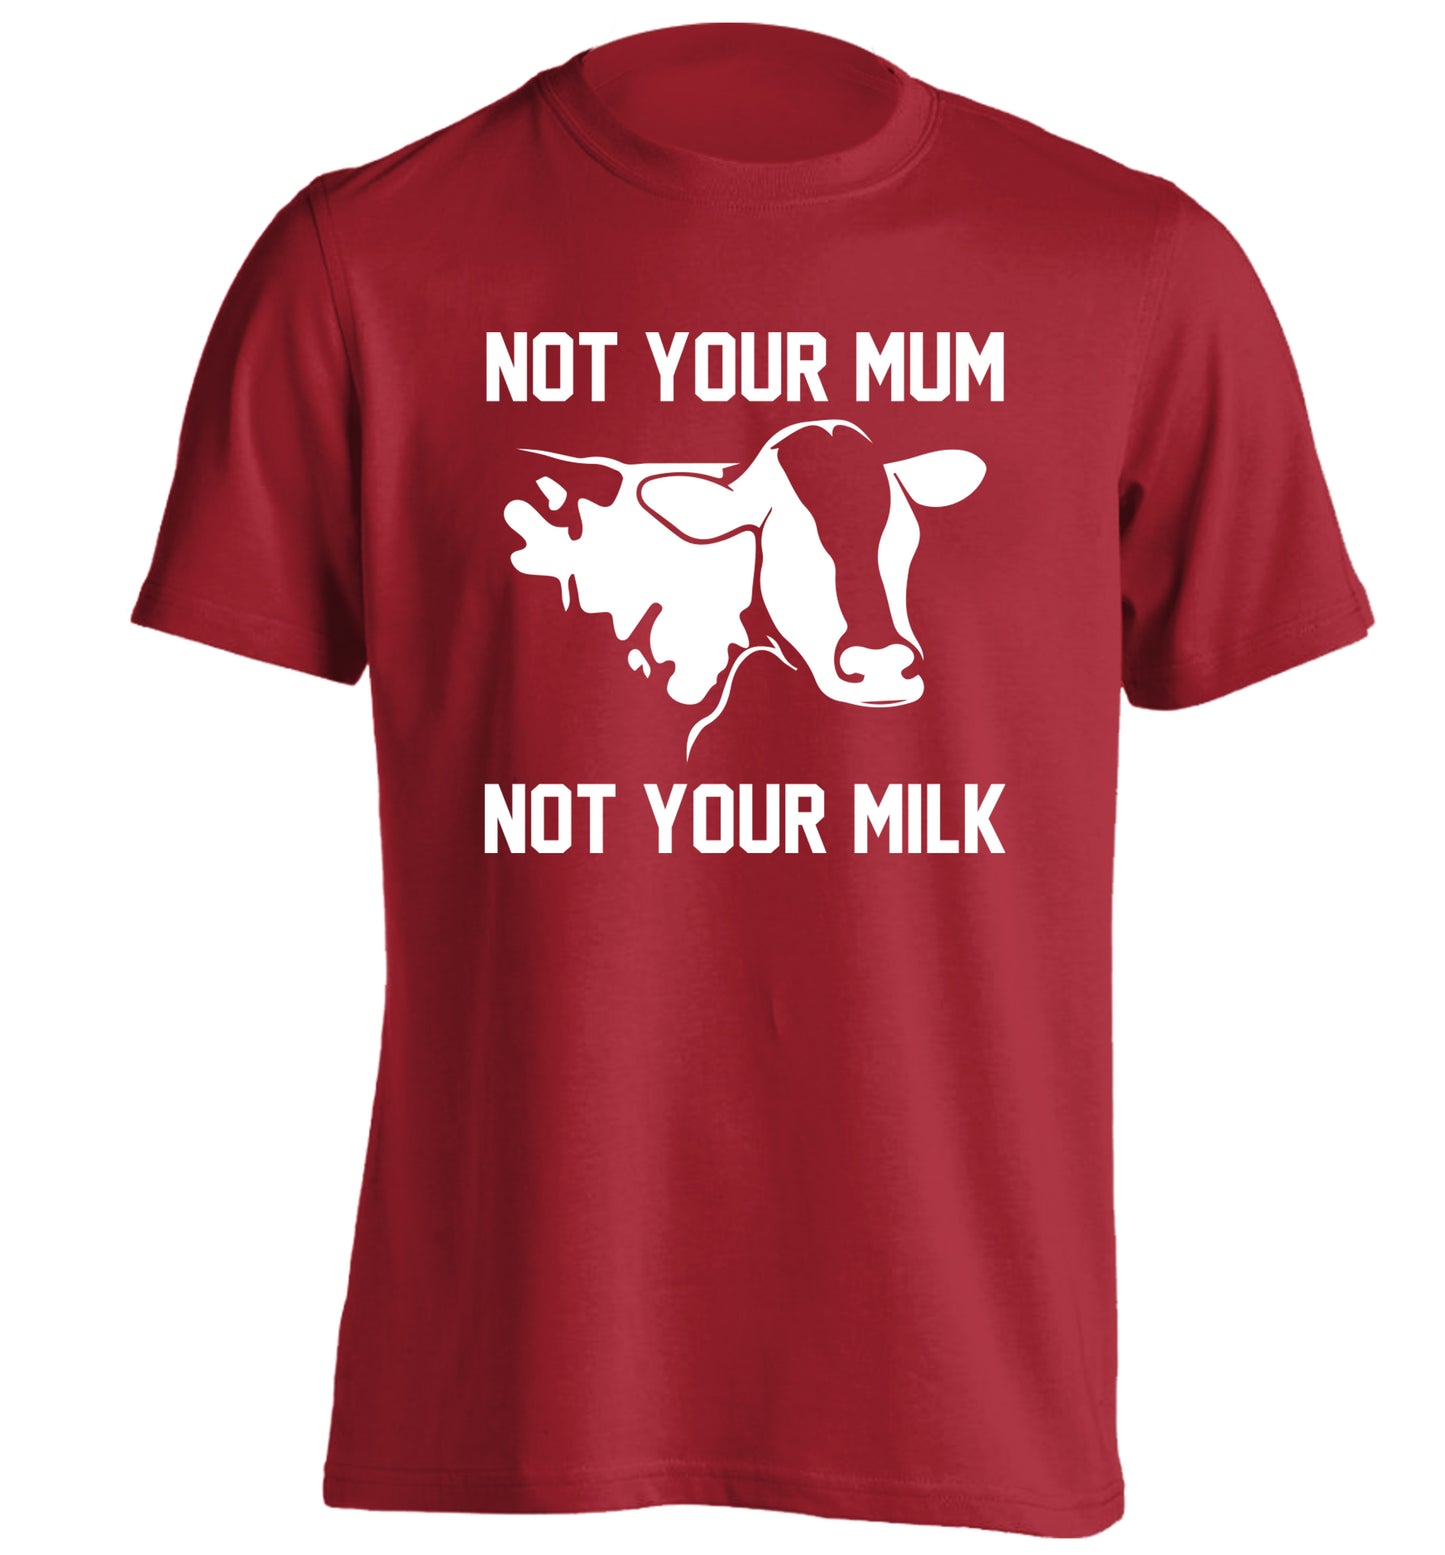 Not your mum not your milk adults unisex red Tshirt 2XL